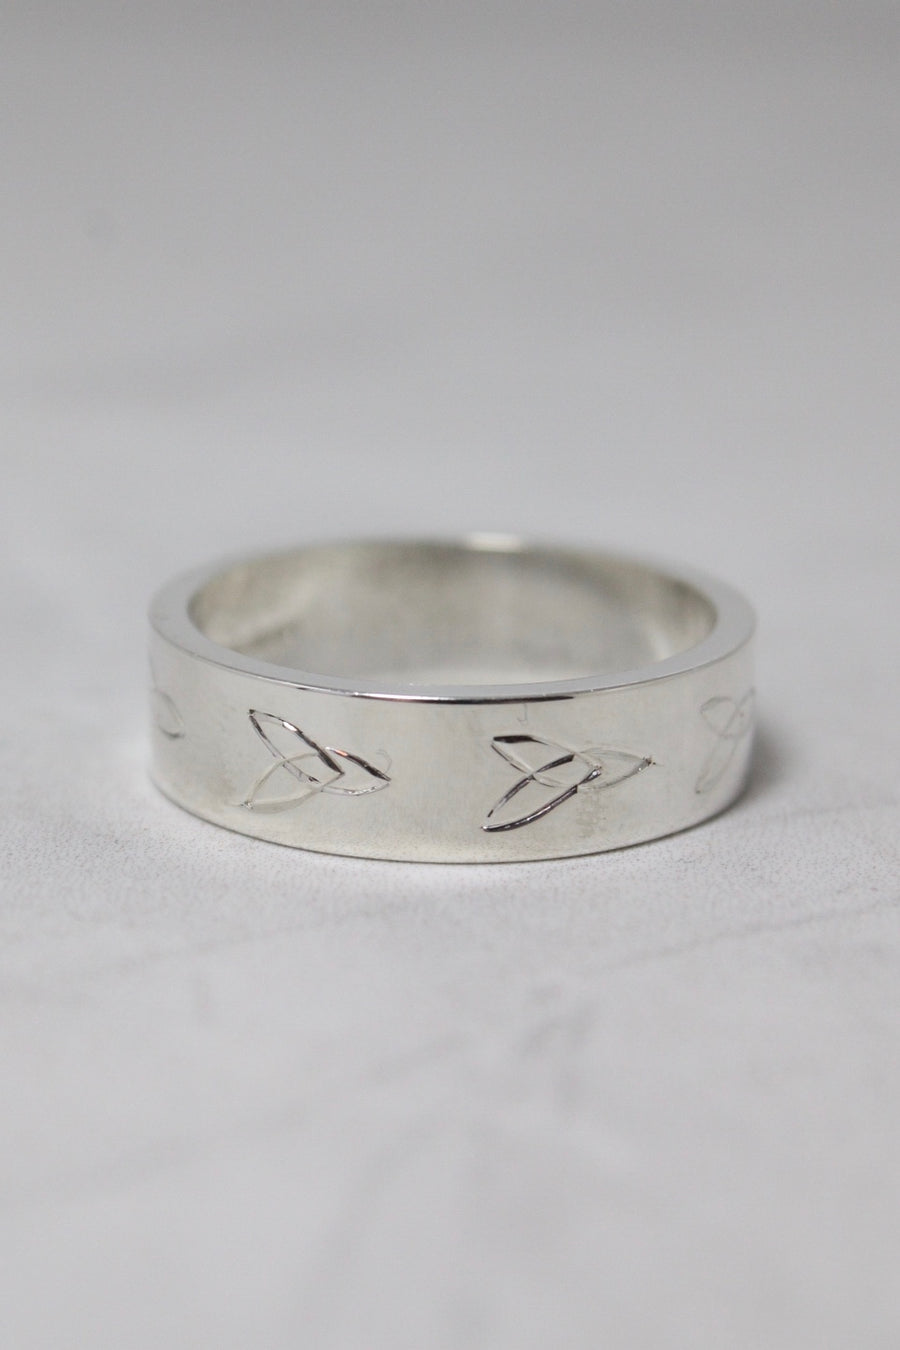 Silver Hand Engraved Design Ring